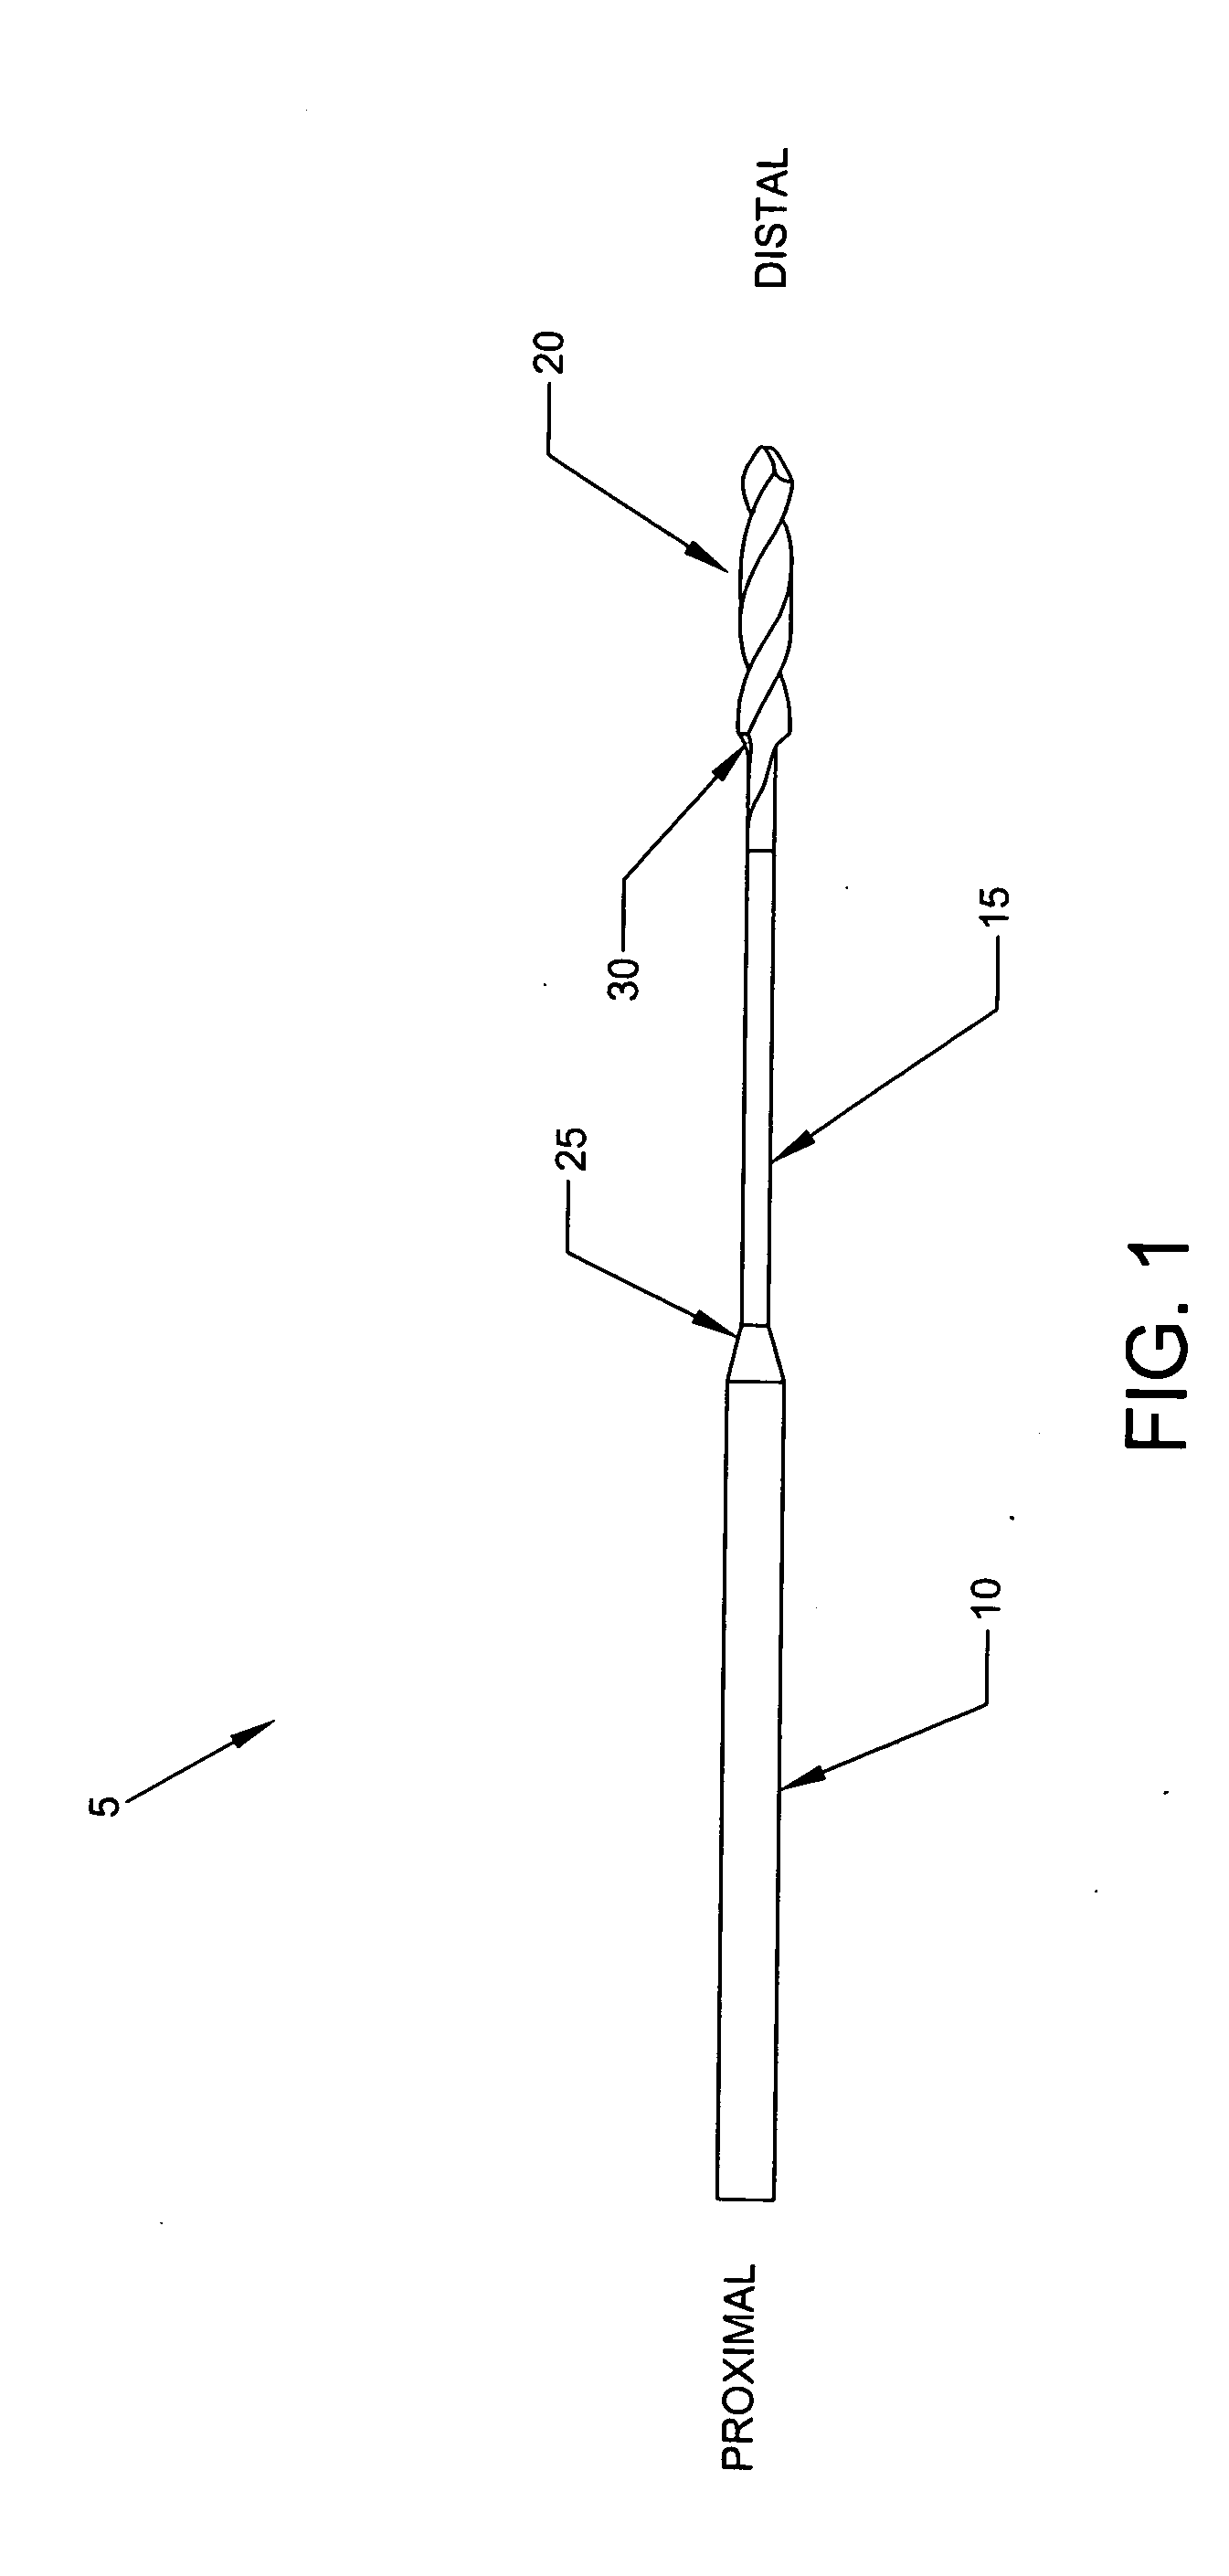 Flexible drill bit and angled drill guide for use with the same